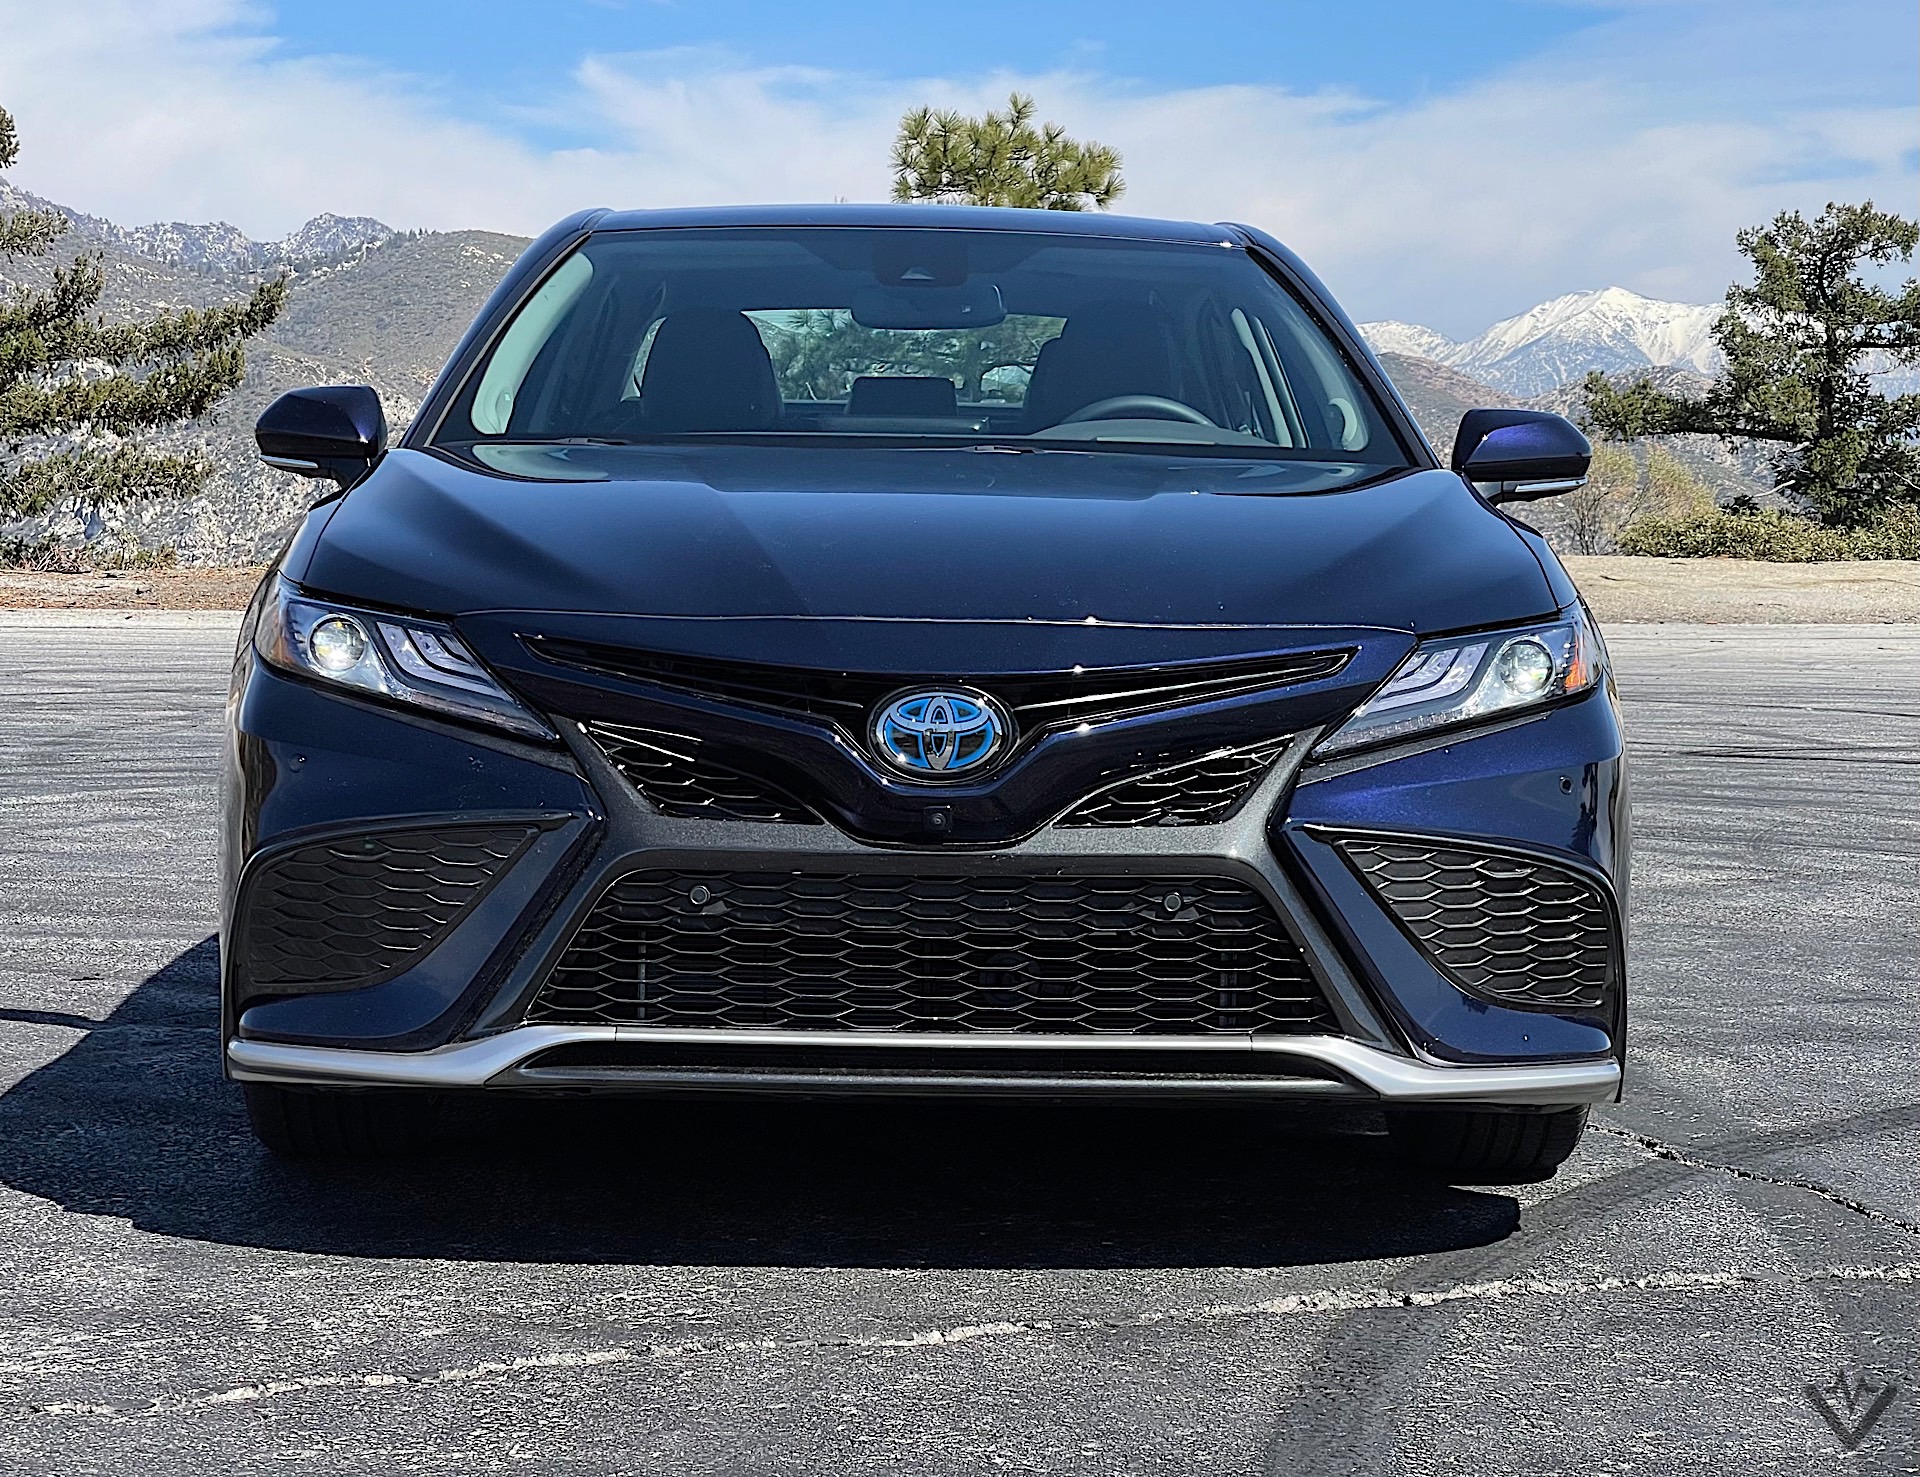 2021 Toyota Camry Hybrid front 02 1